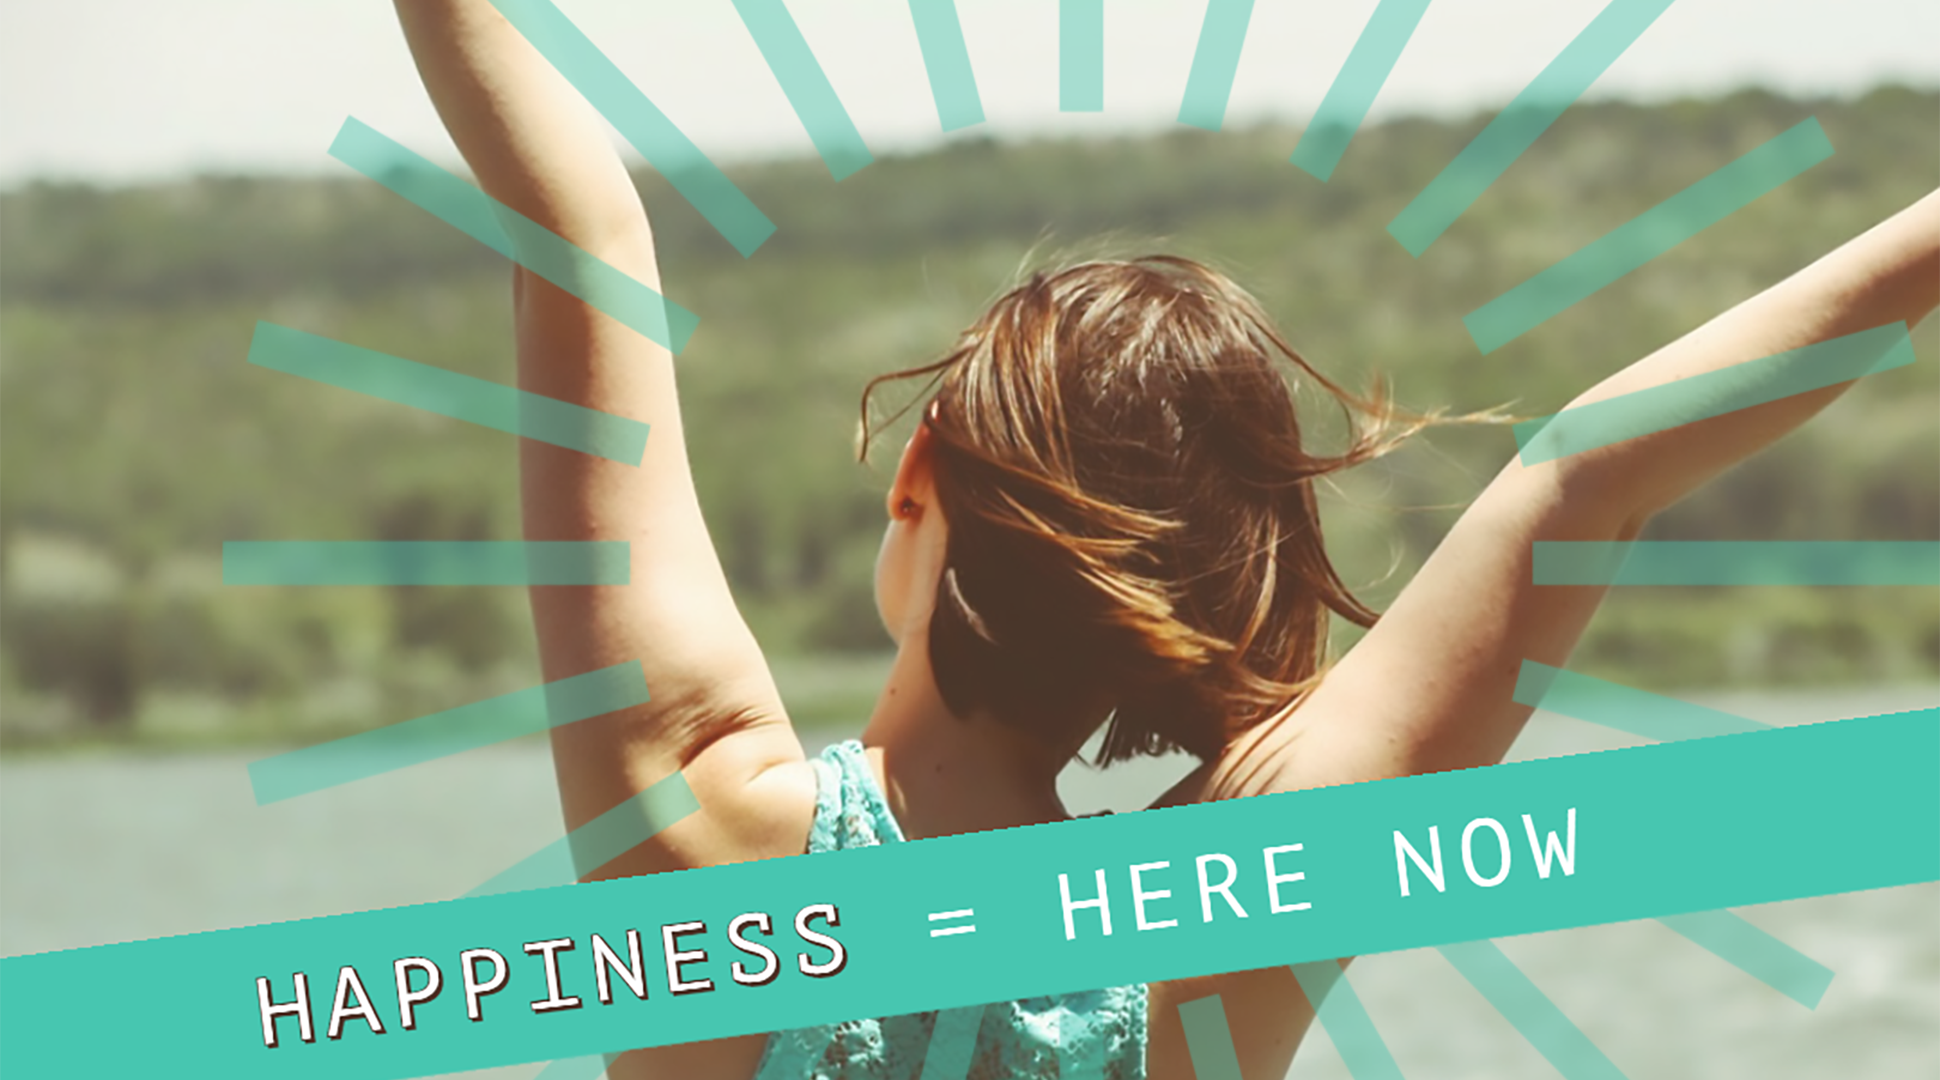 What does it mean to be happy?